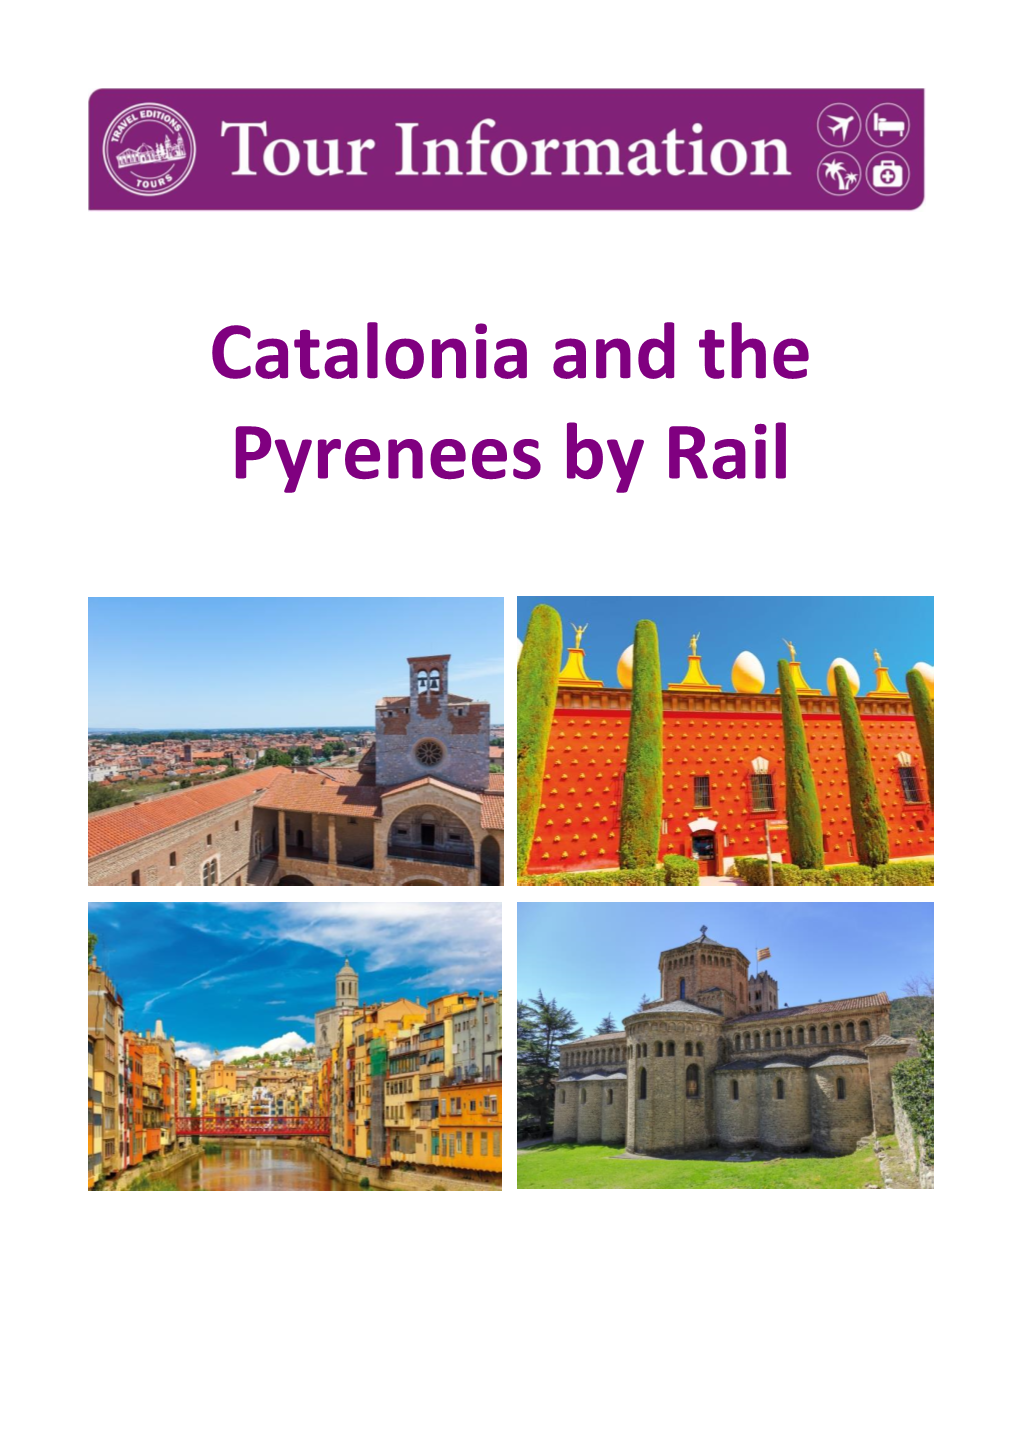 Catalonia and the Pyrenees by Rail